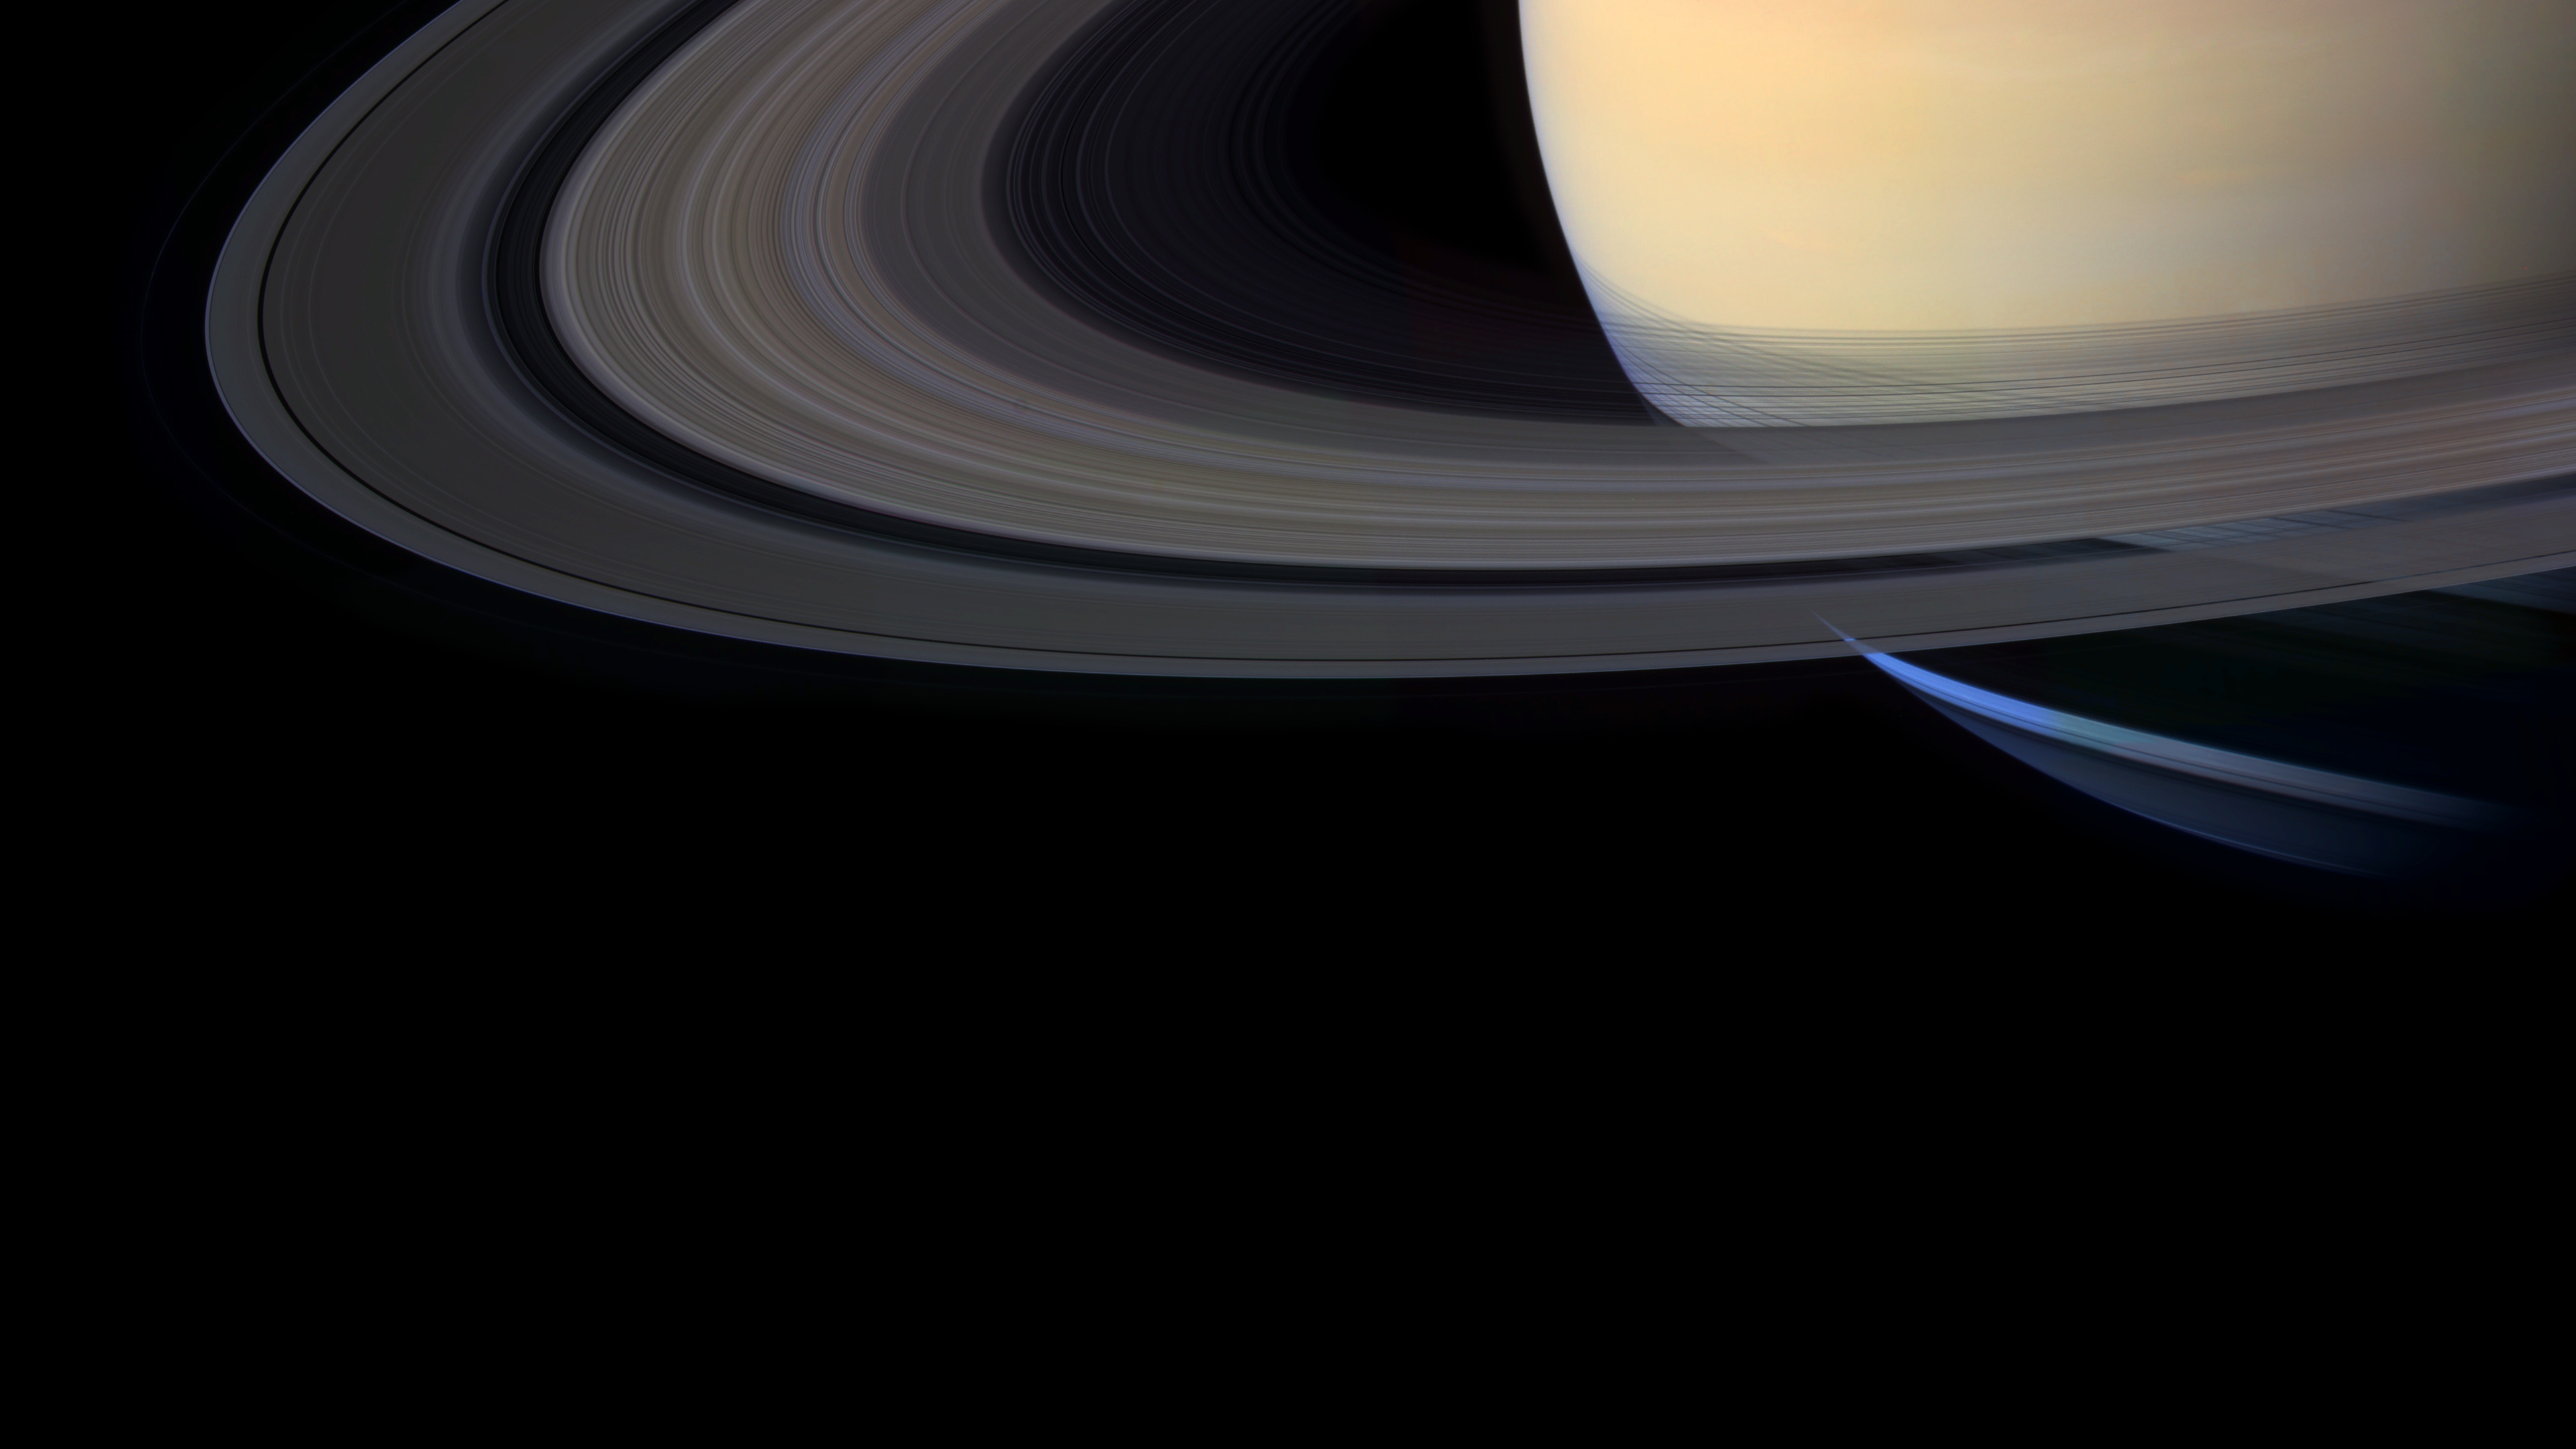 Wallpapers ring system galaxy wallpaper saturn on the desktop